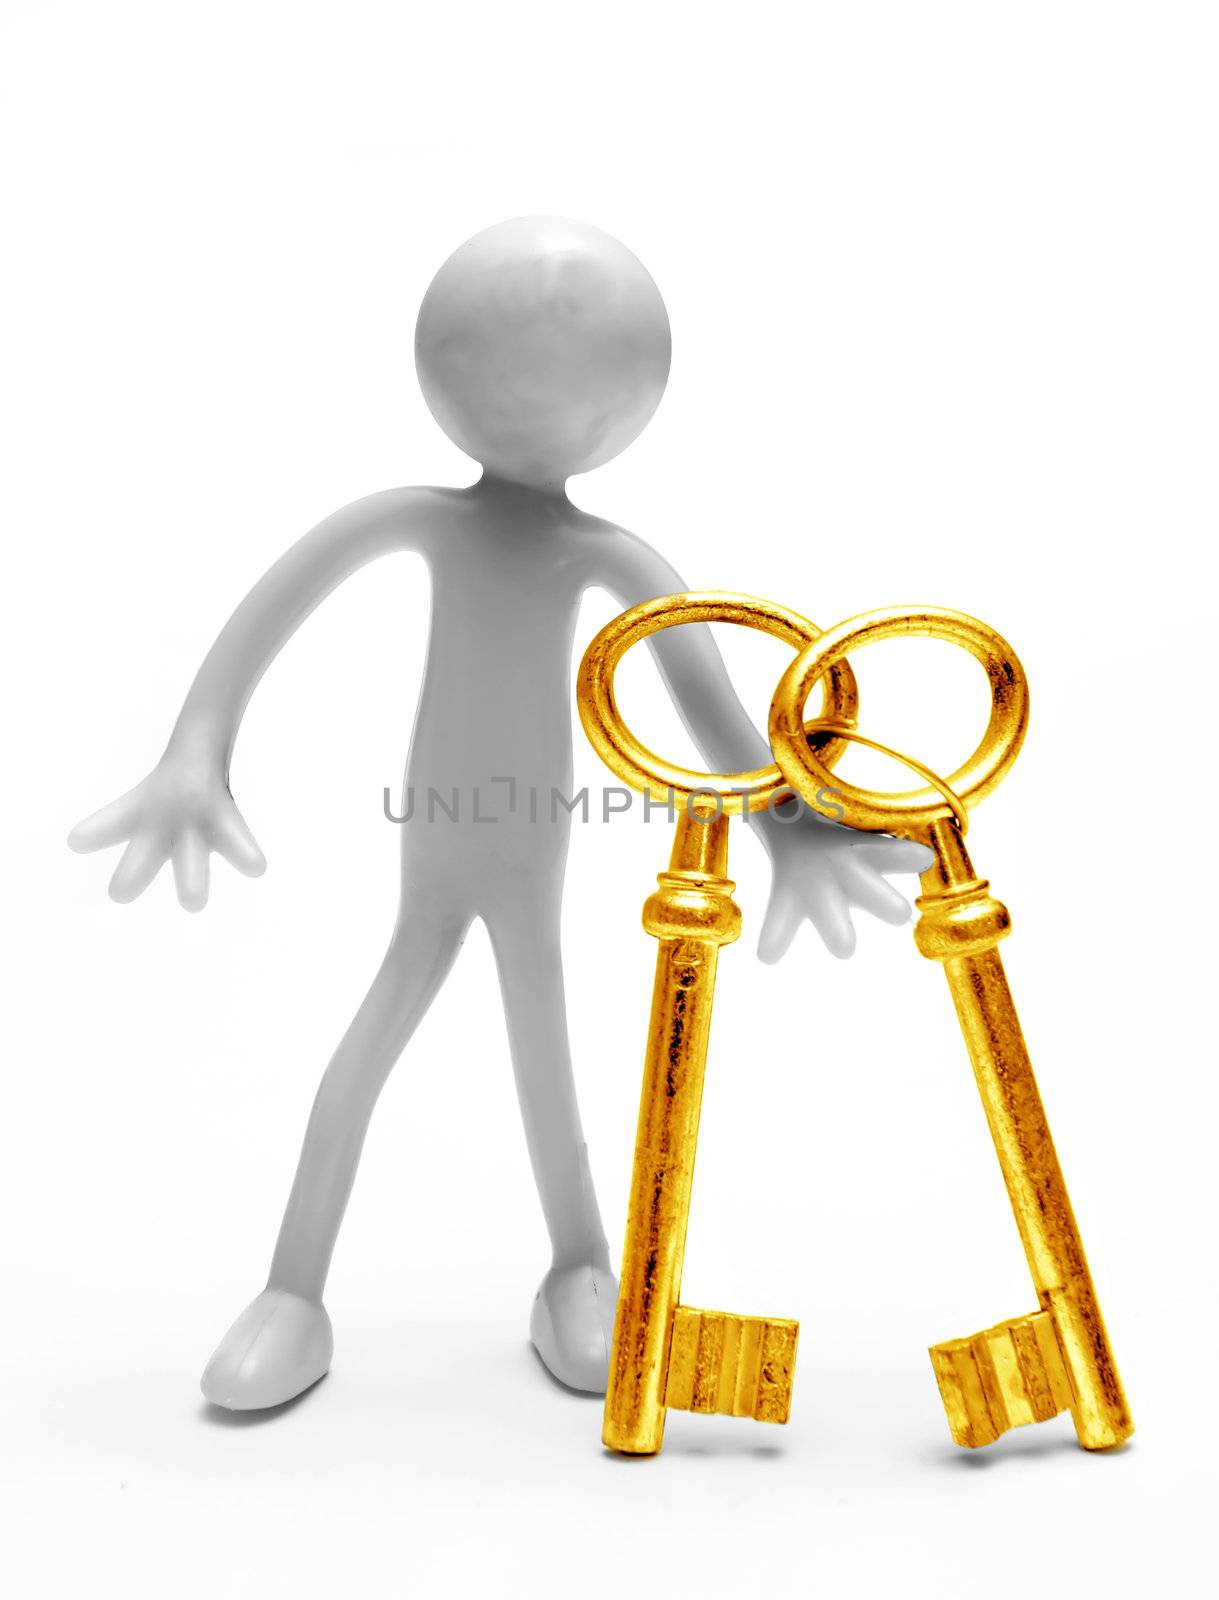 Human figure with gold keys by photocreo